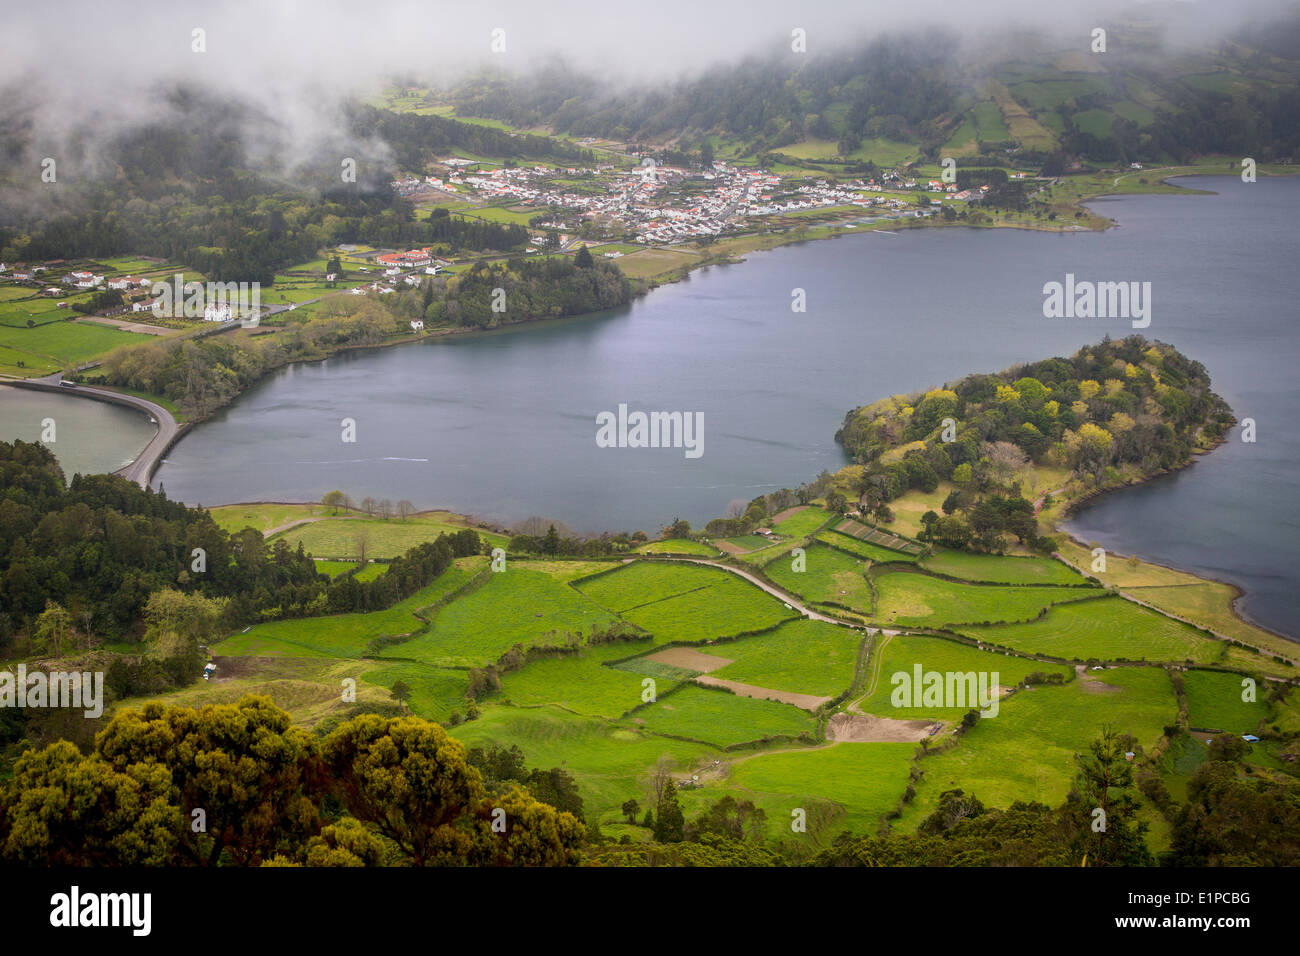 Misty day over Sete Cidades and the twin lakes on Sao Miguel Island, Azores, Portugal Stock Photo